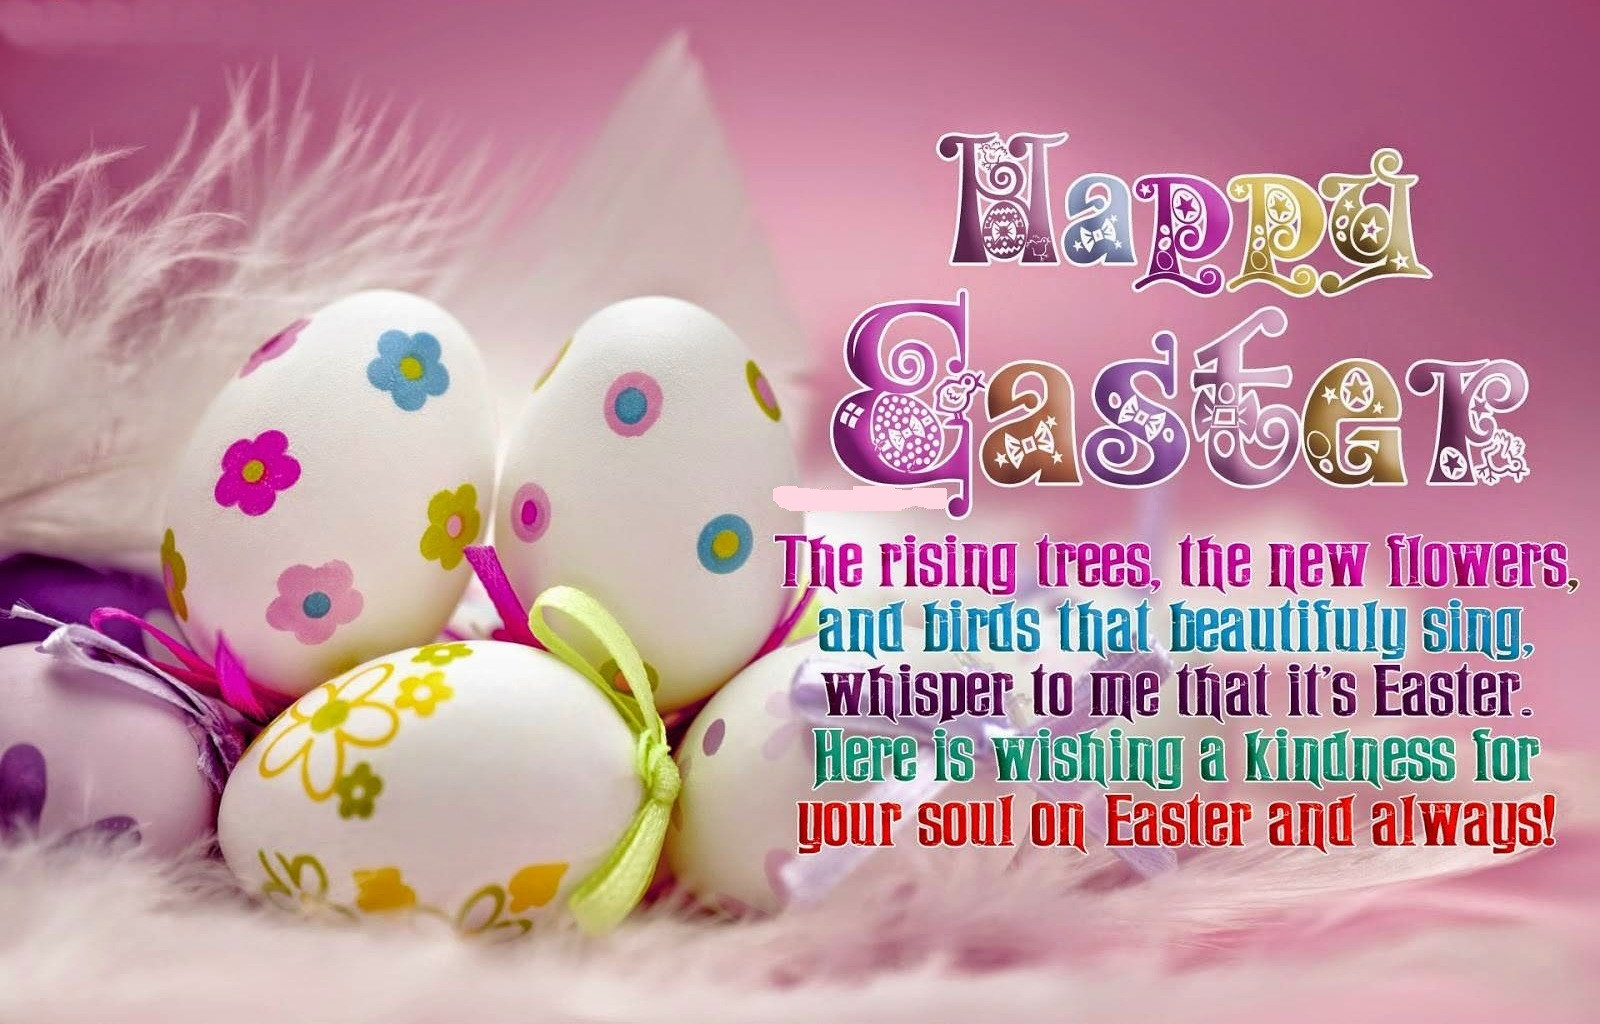 Happy Easter Quotes And Images
 51 Famous Happy Easter Quotes and Sayings With